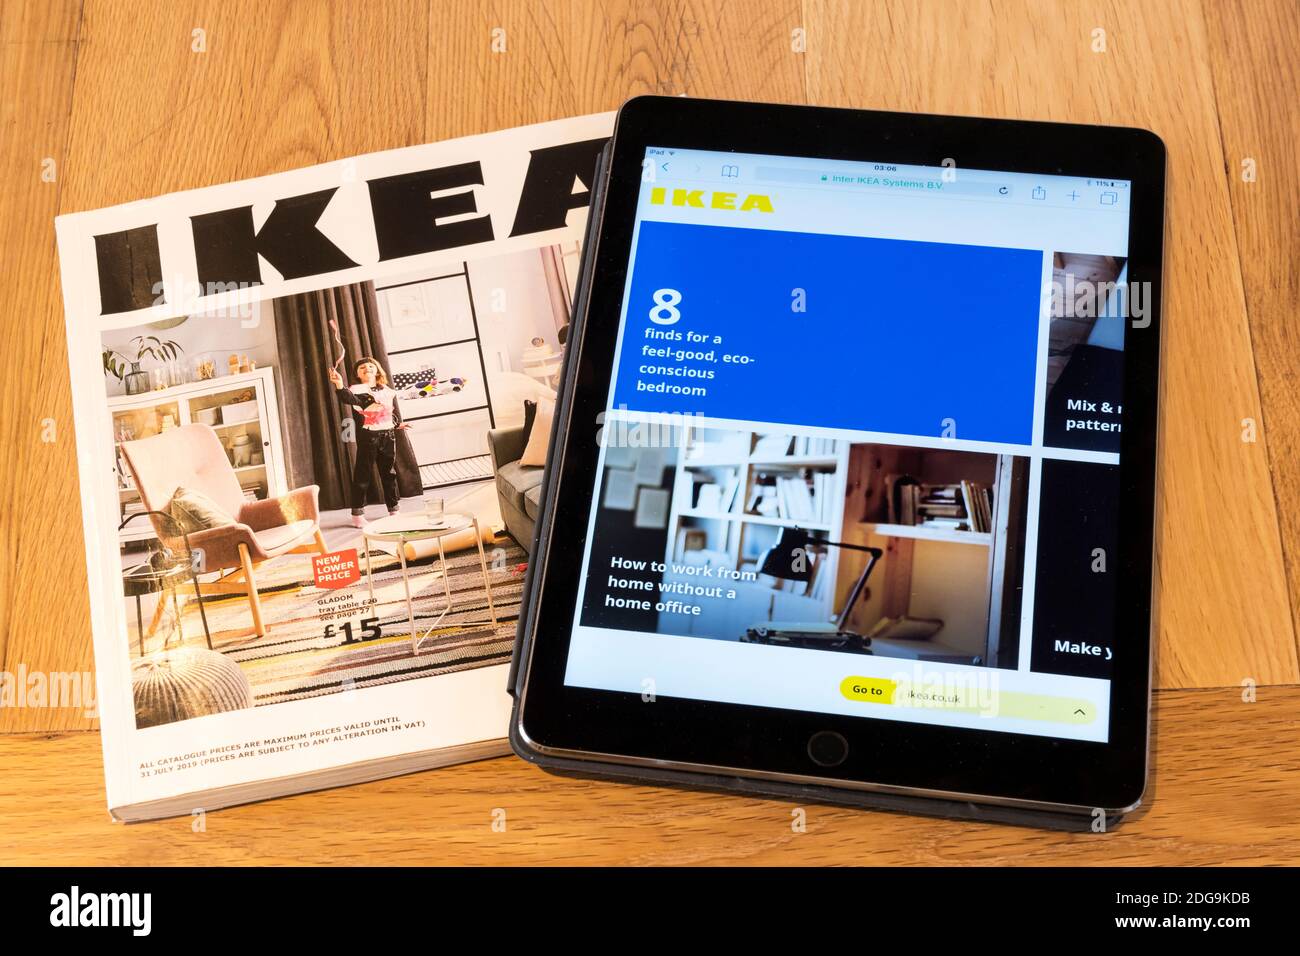 The household & furniture retailer IKEA have announced that their paper  catalogue is to be discontinued and to move solely online. The 2021 edition  will be the last published in paper format.